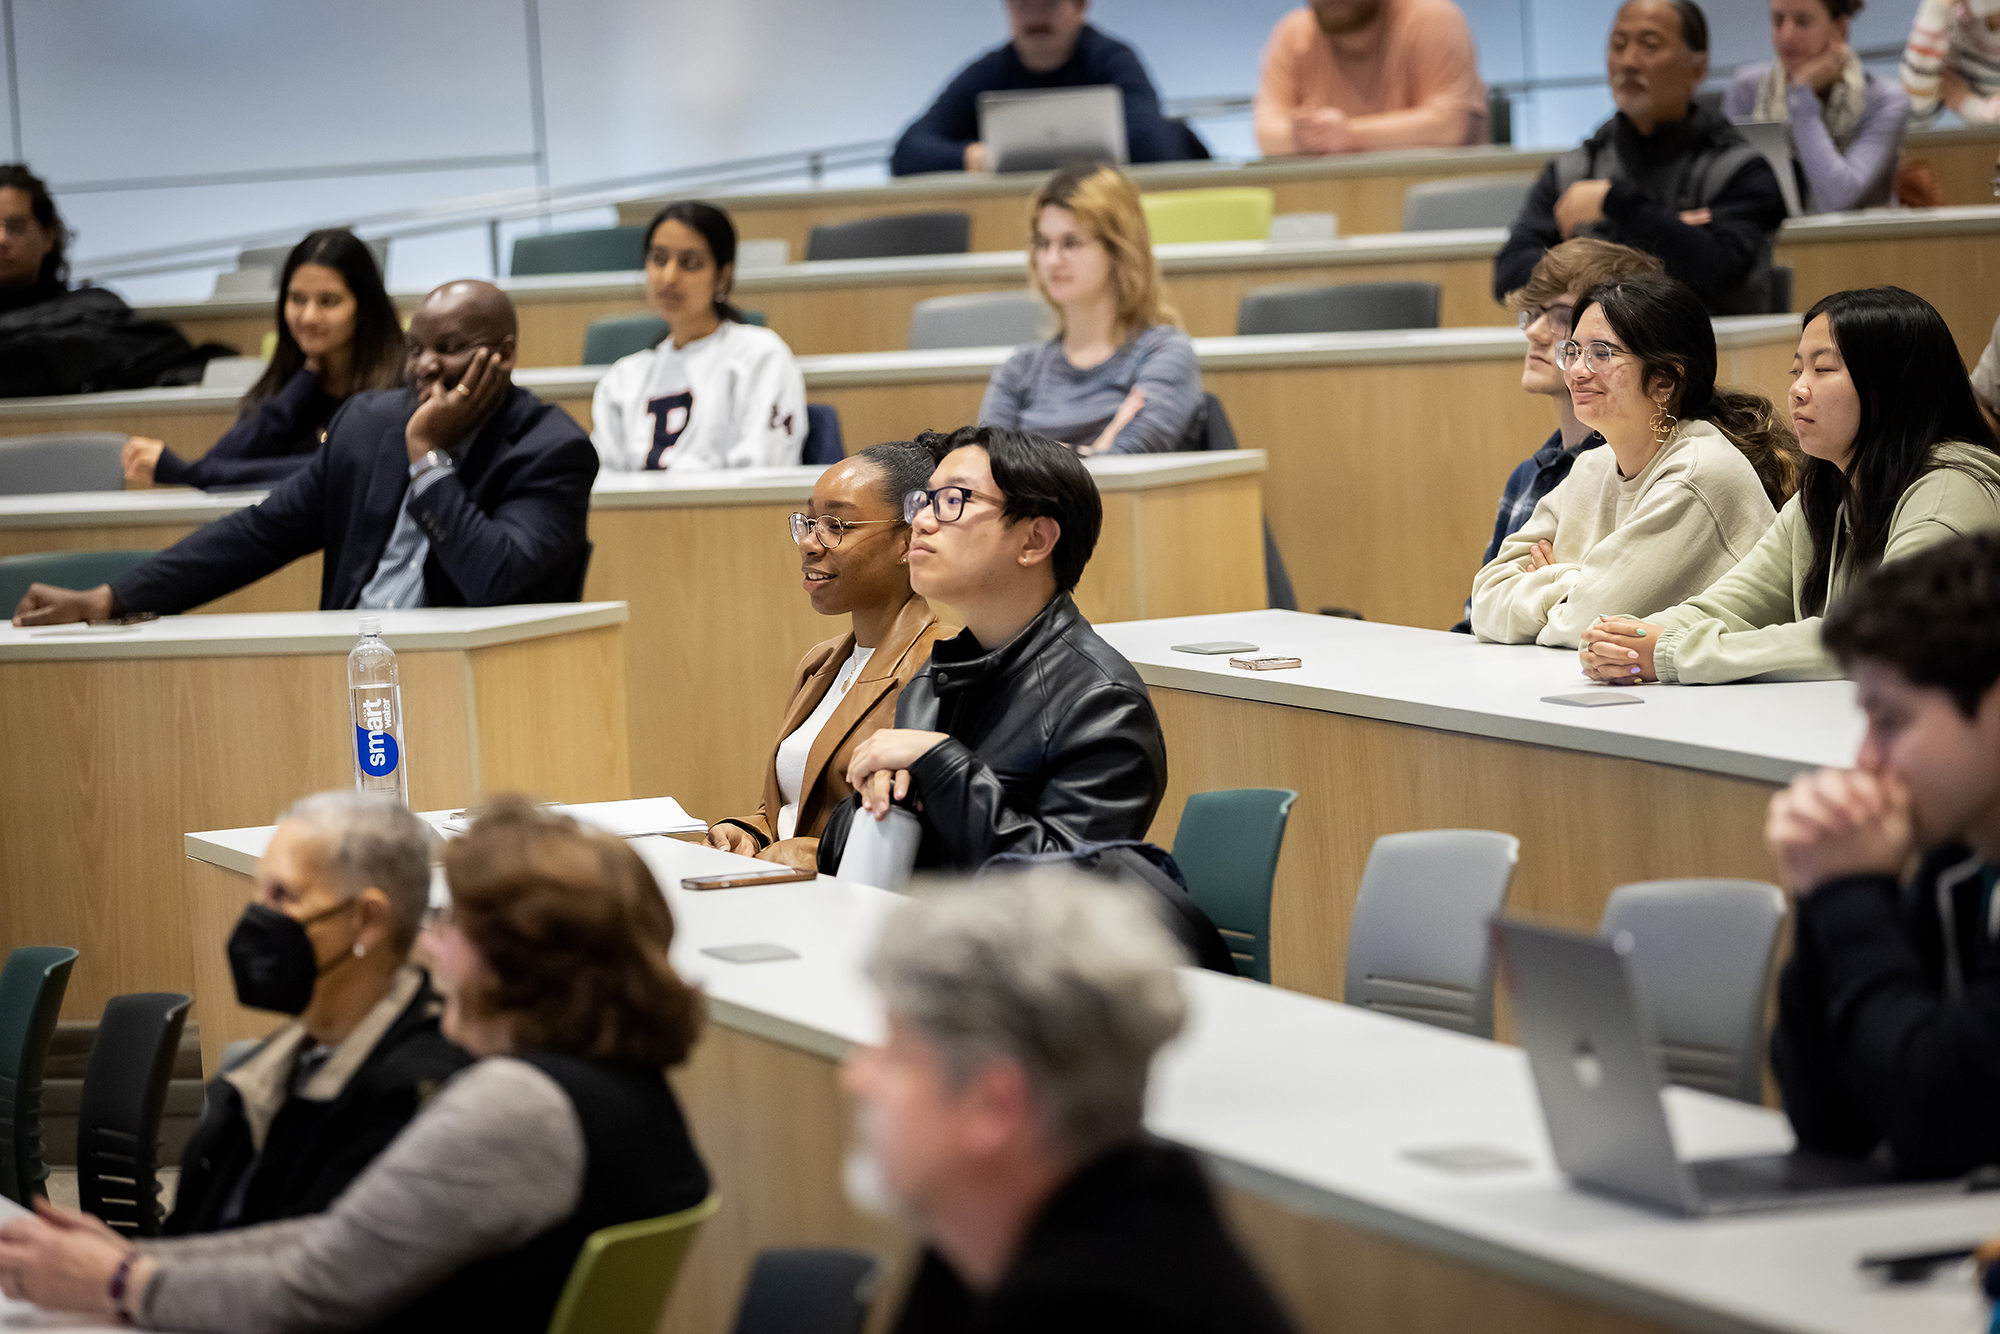 lecture attendees pay attention to a speaker in an auditorium